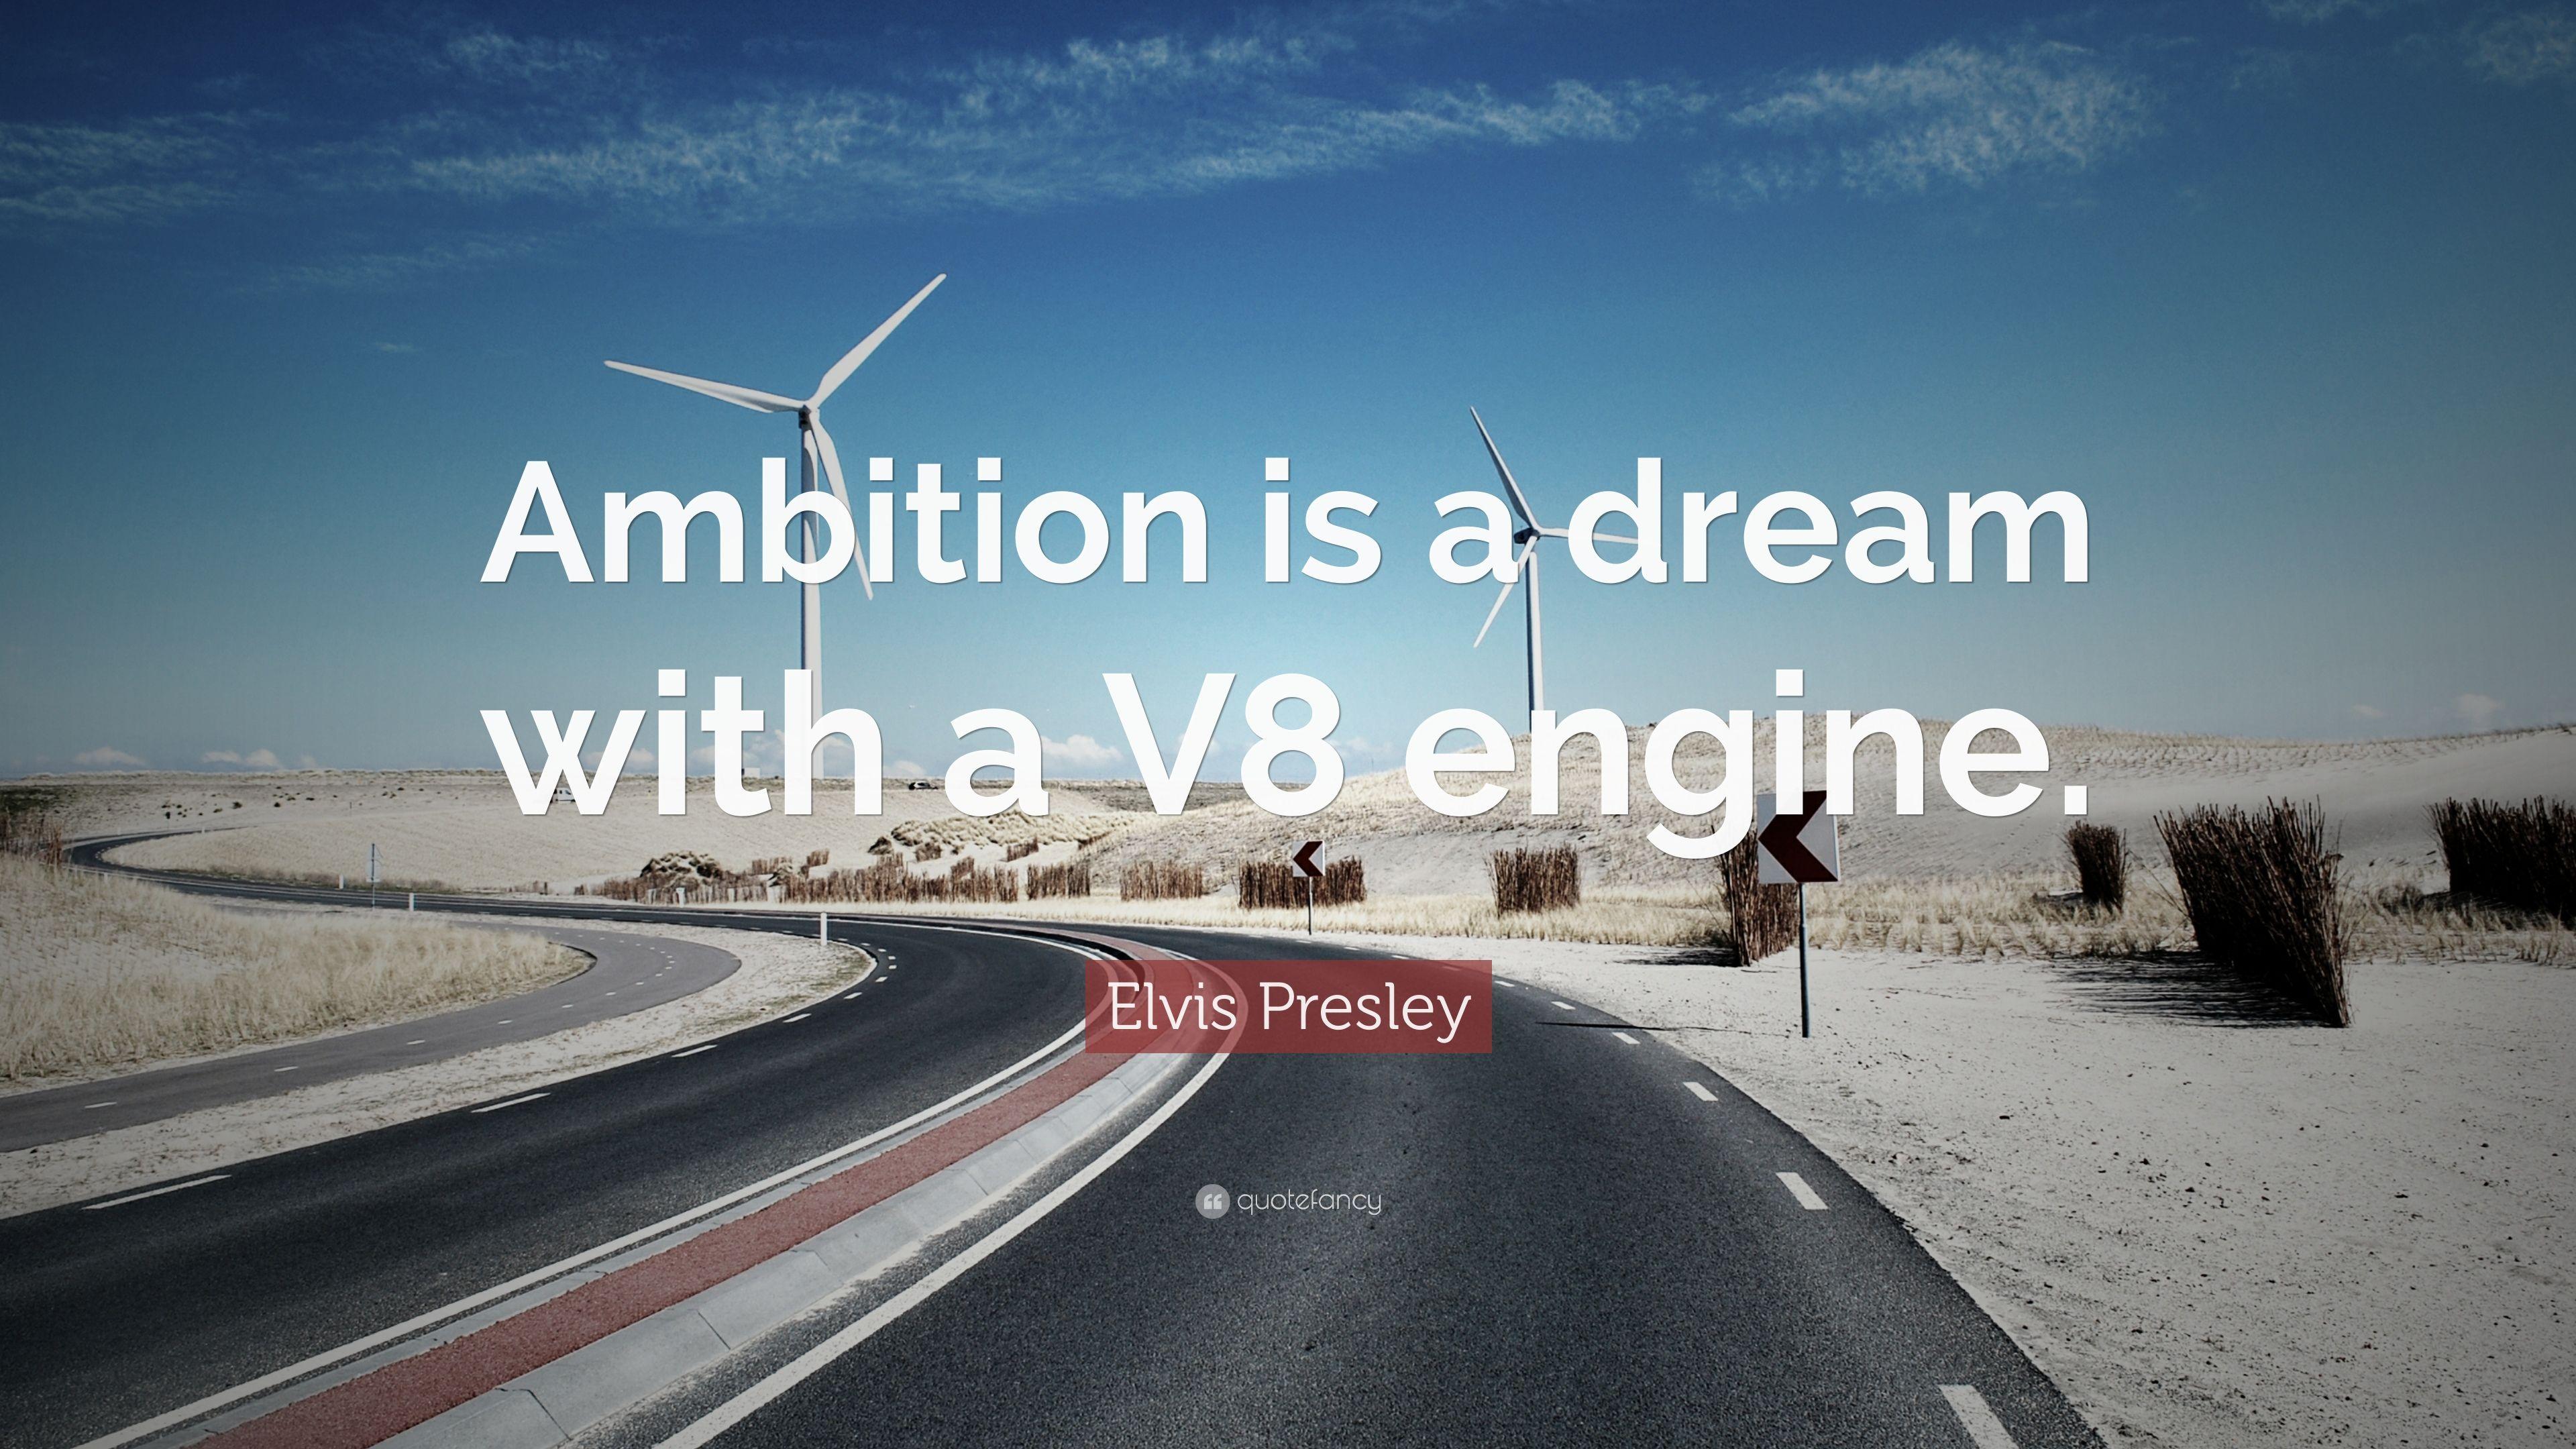 Elvis Presley Quote: “Ambition is a dream with a V8 engine.” 15